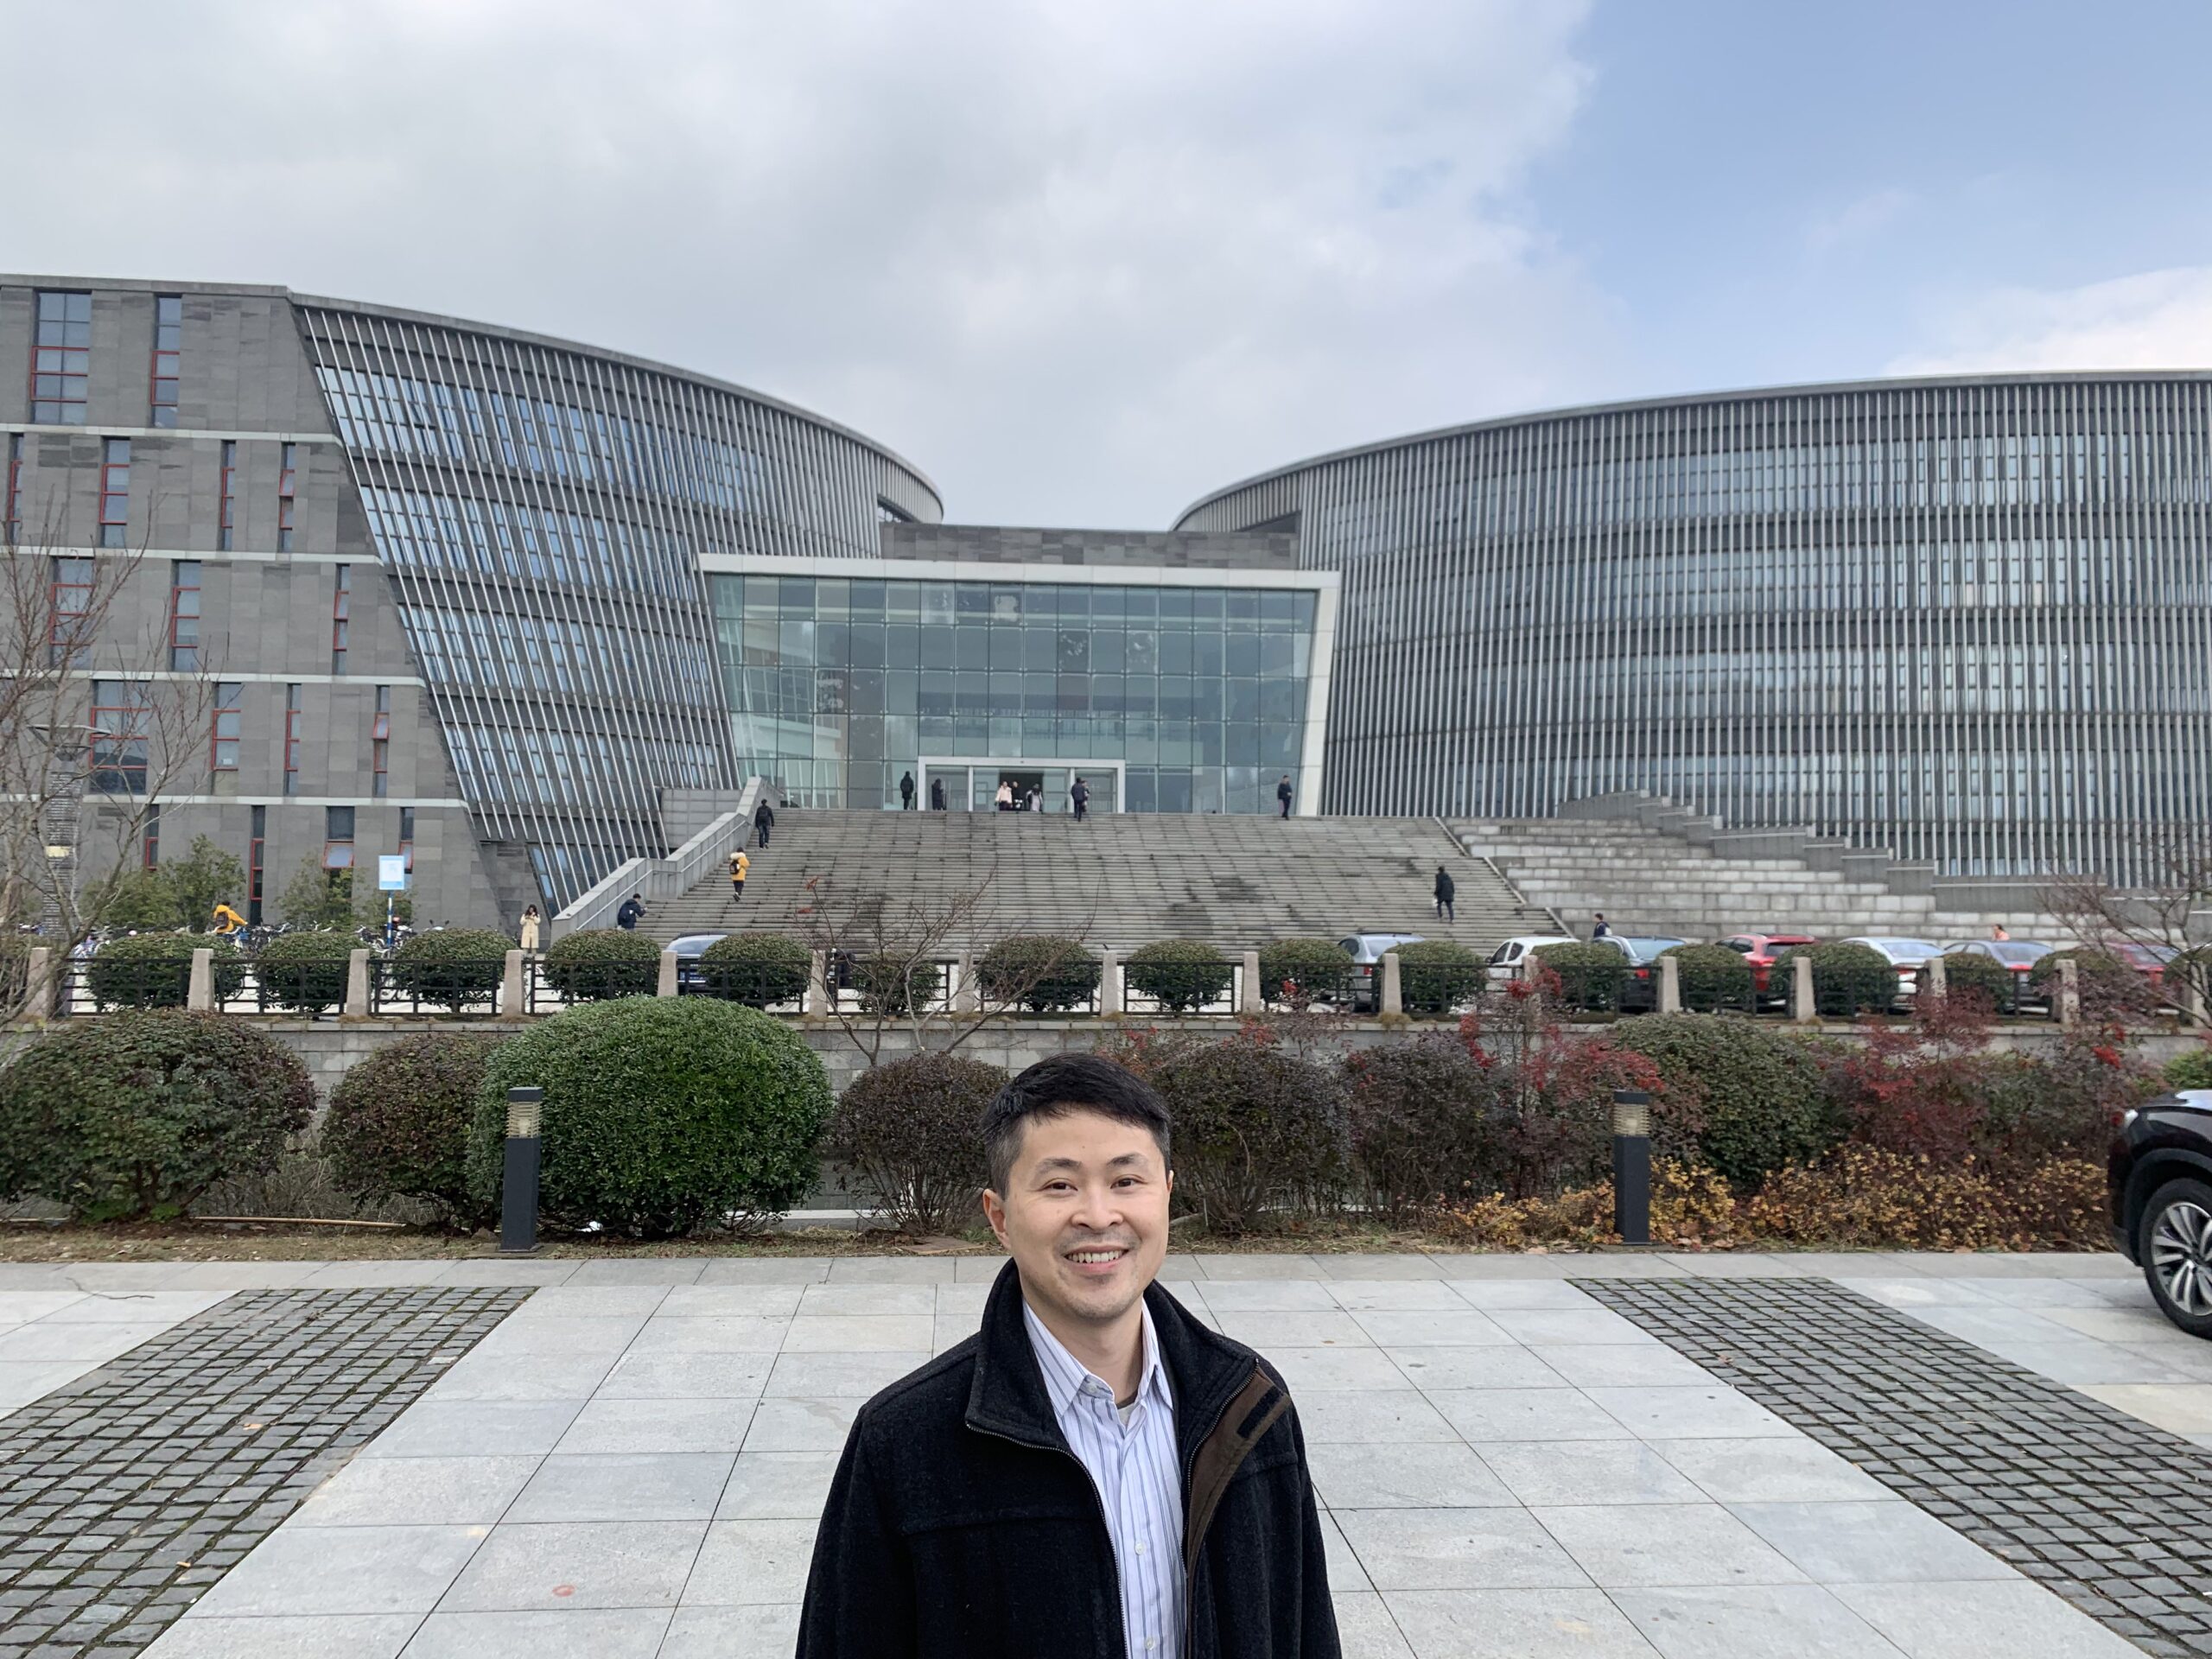 A person wearing a black jacket and a collar shirt stands in front of Nanjing University’s main library, a large modern building with sloping walls.